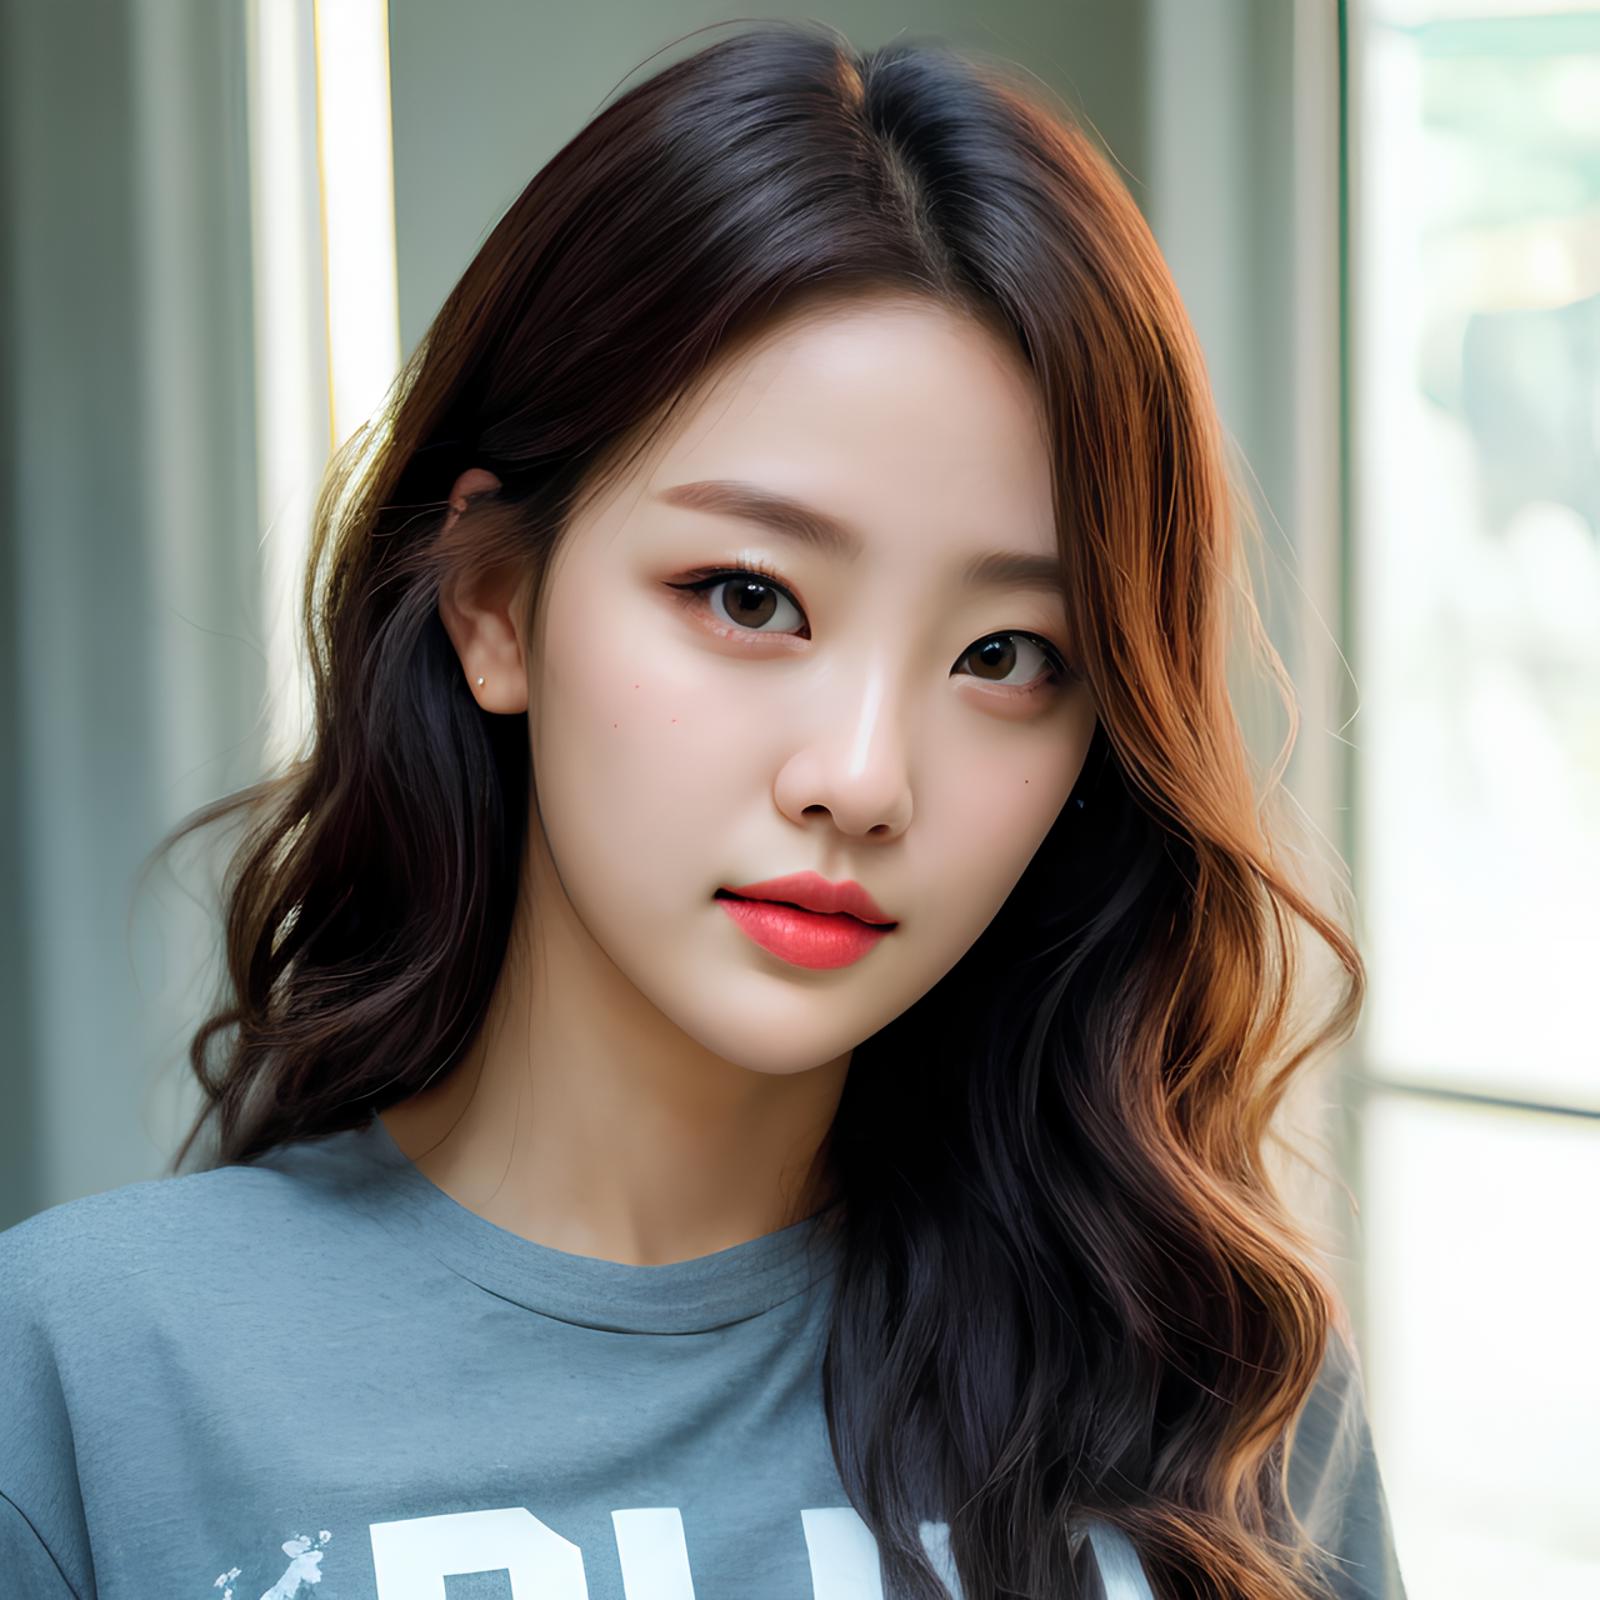 Not Loona - YVES image by Tissue_AI